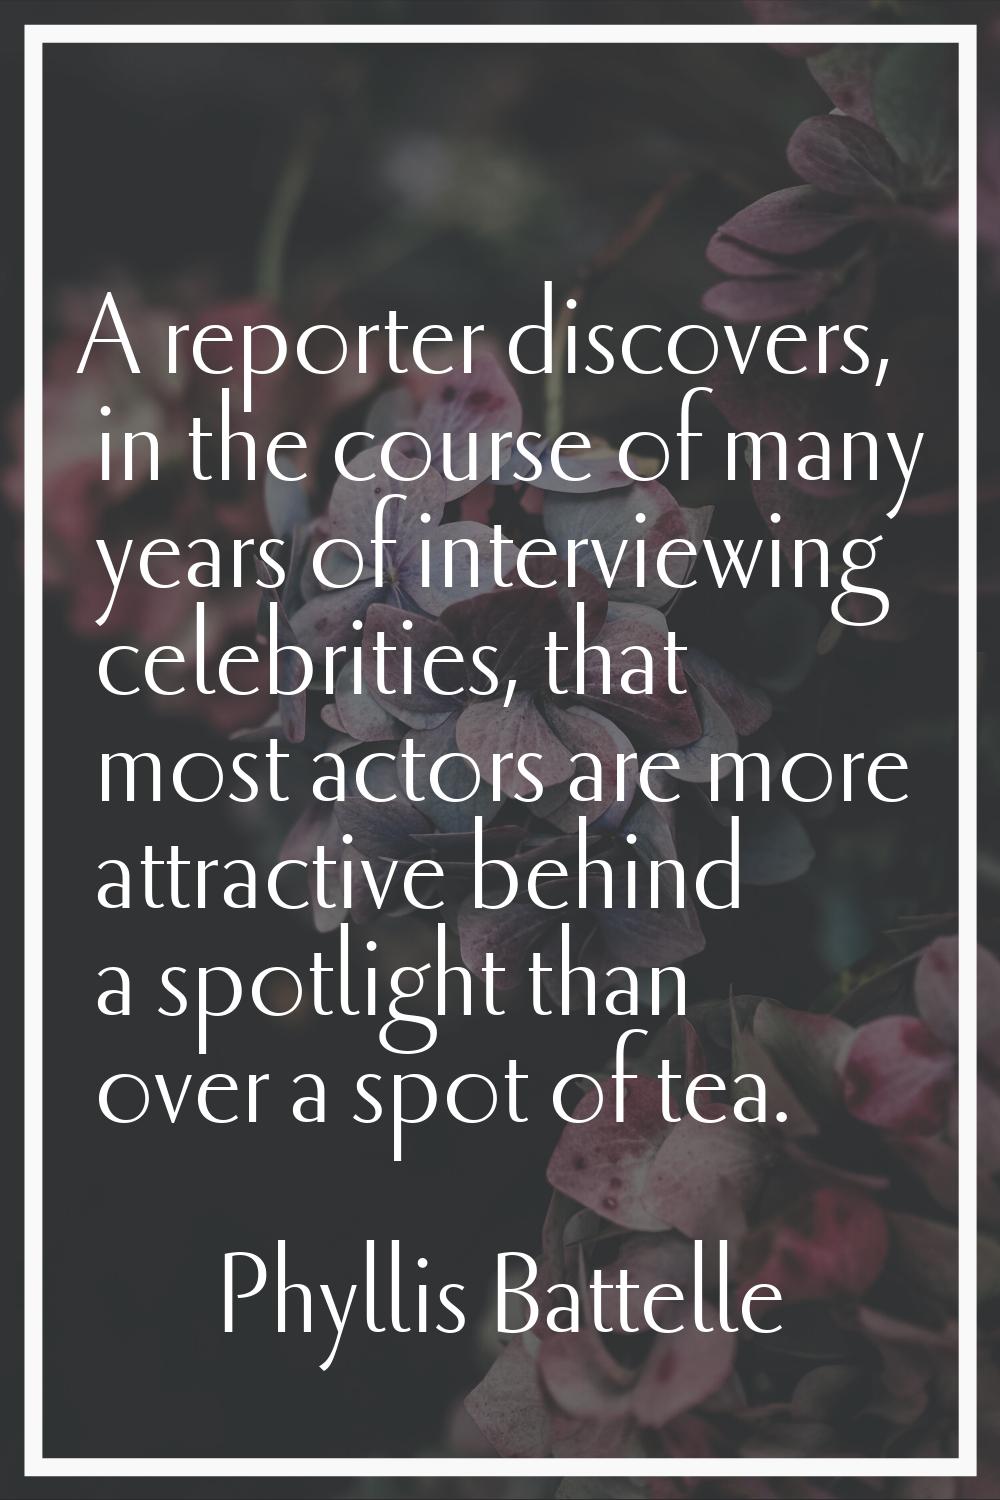 A reporter discovers, in the course of many years of interviewing celebrities, that most actors are